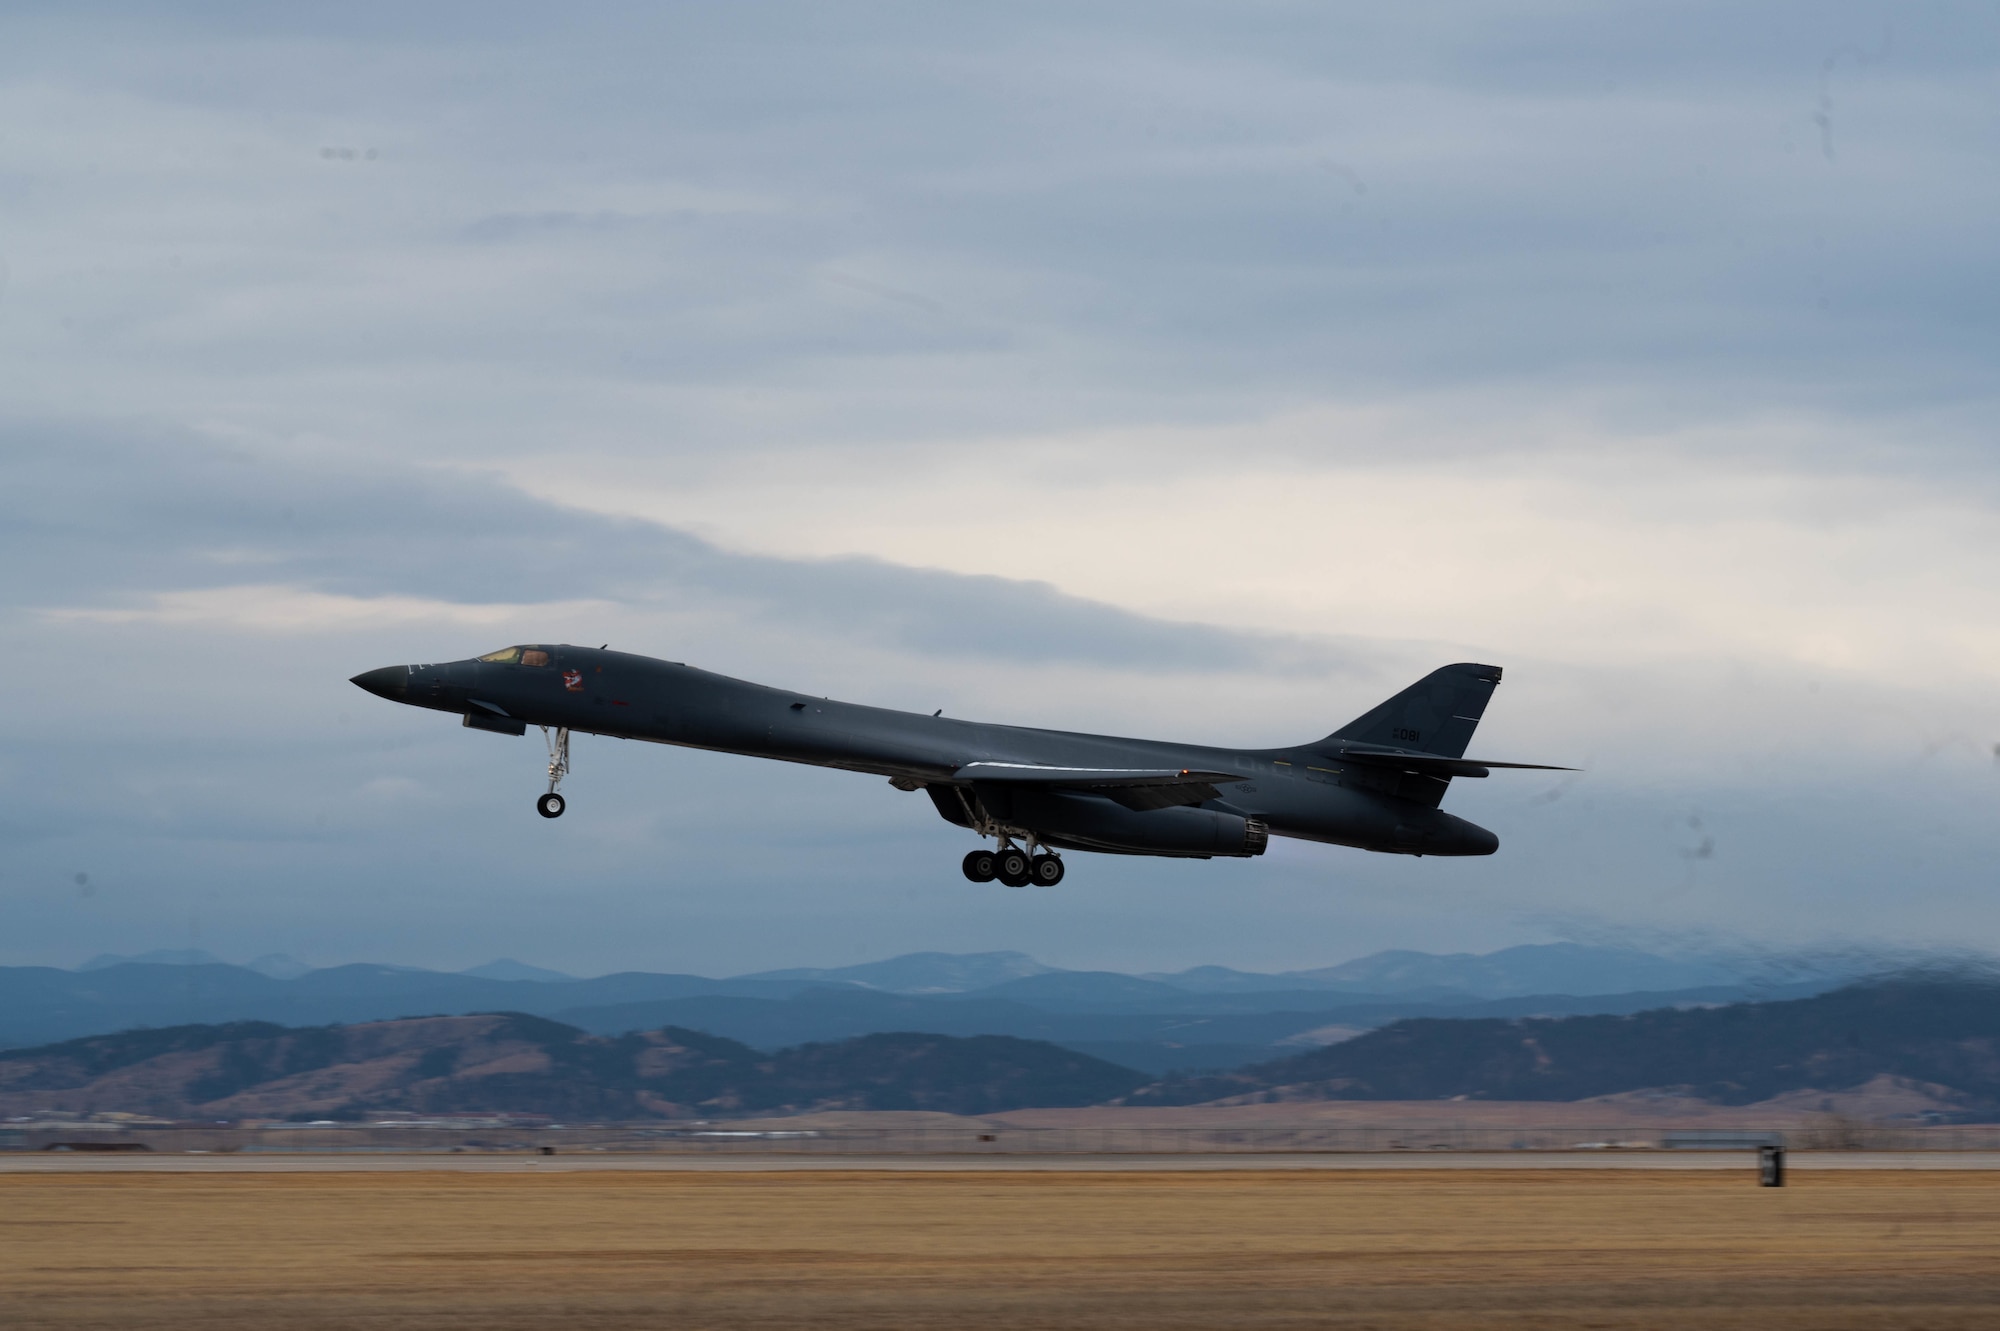 A B-1B Lancer takes off from Ellsworth Air Force Base, S.D., March 12, 2021.